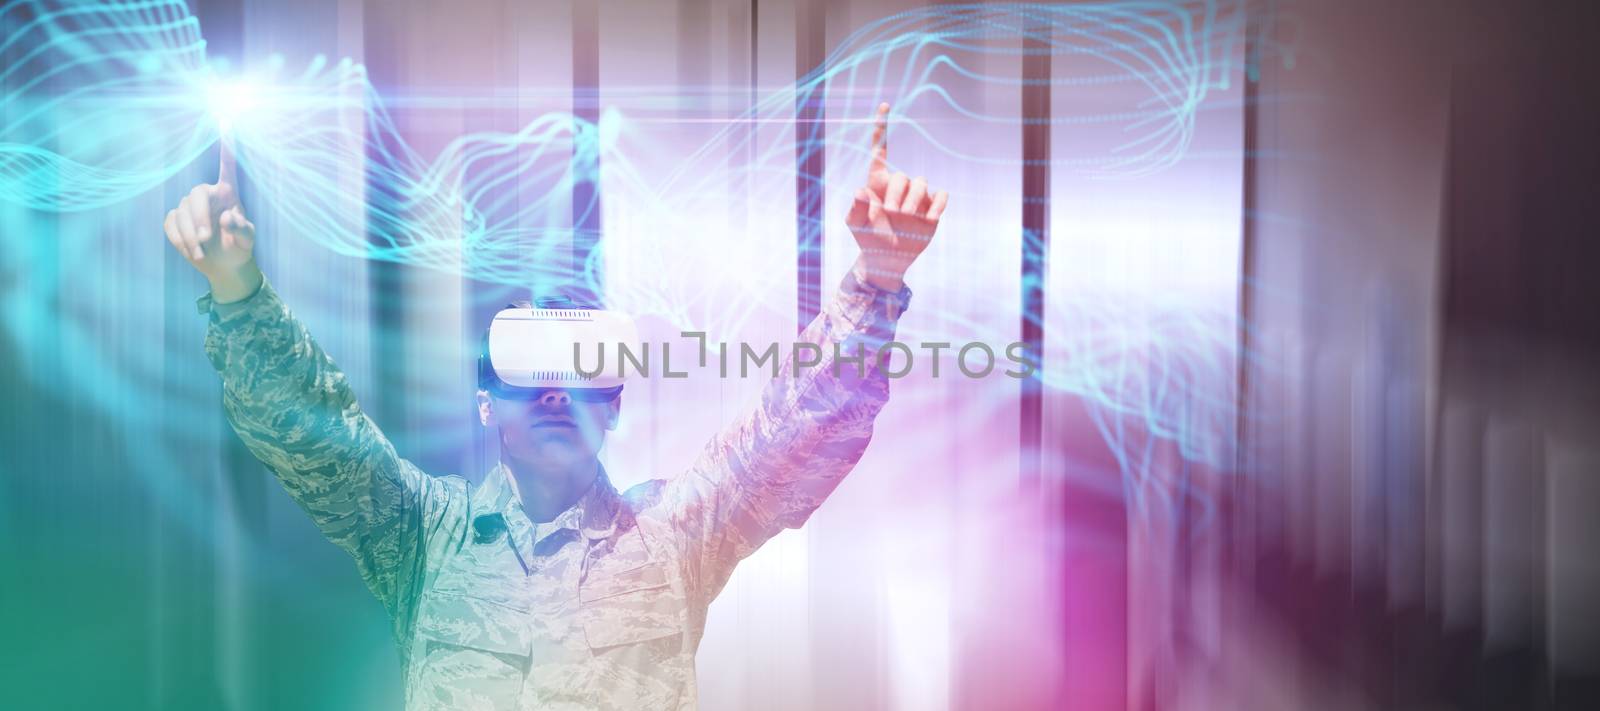 Army soldier gesturing while using virtual reality glasses against abstract glowing black background